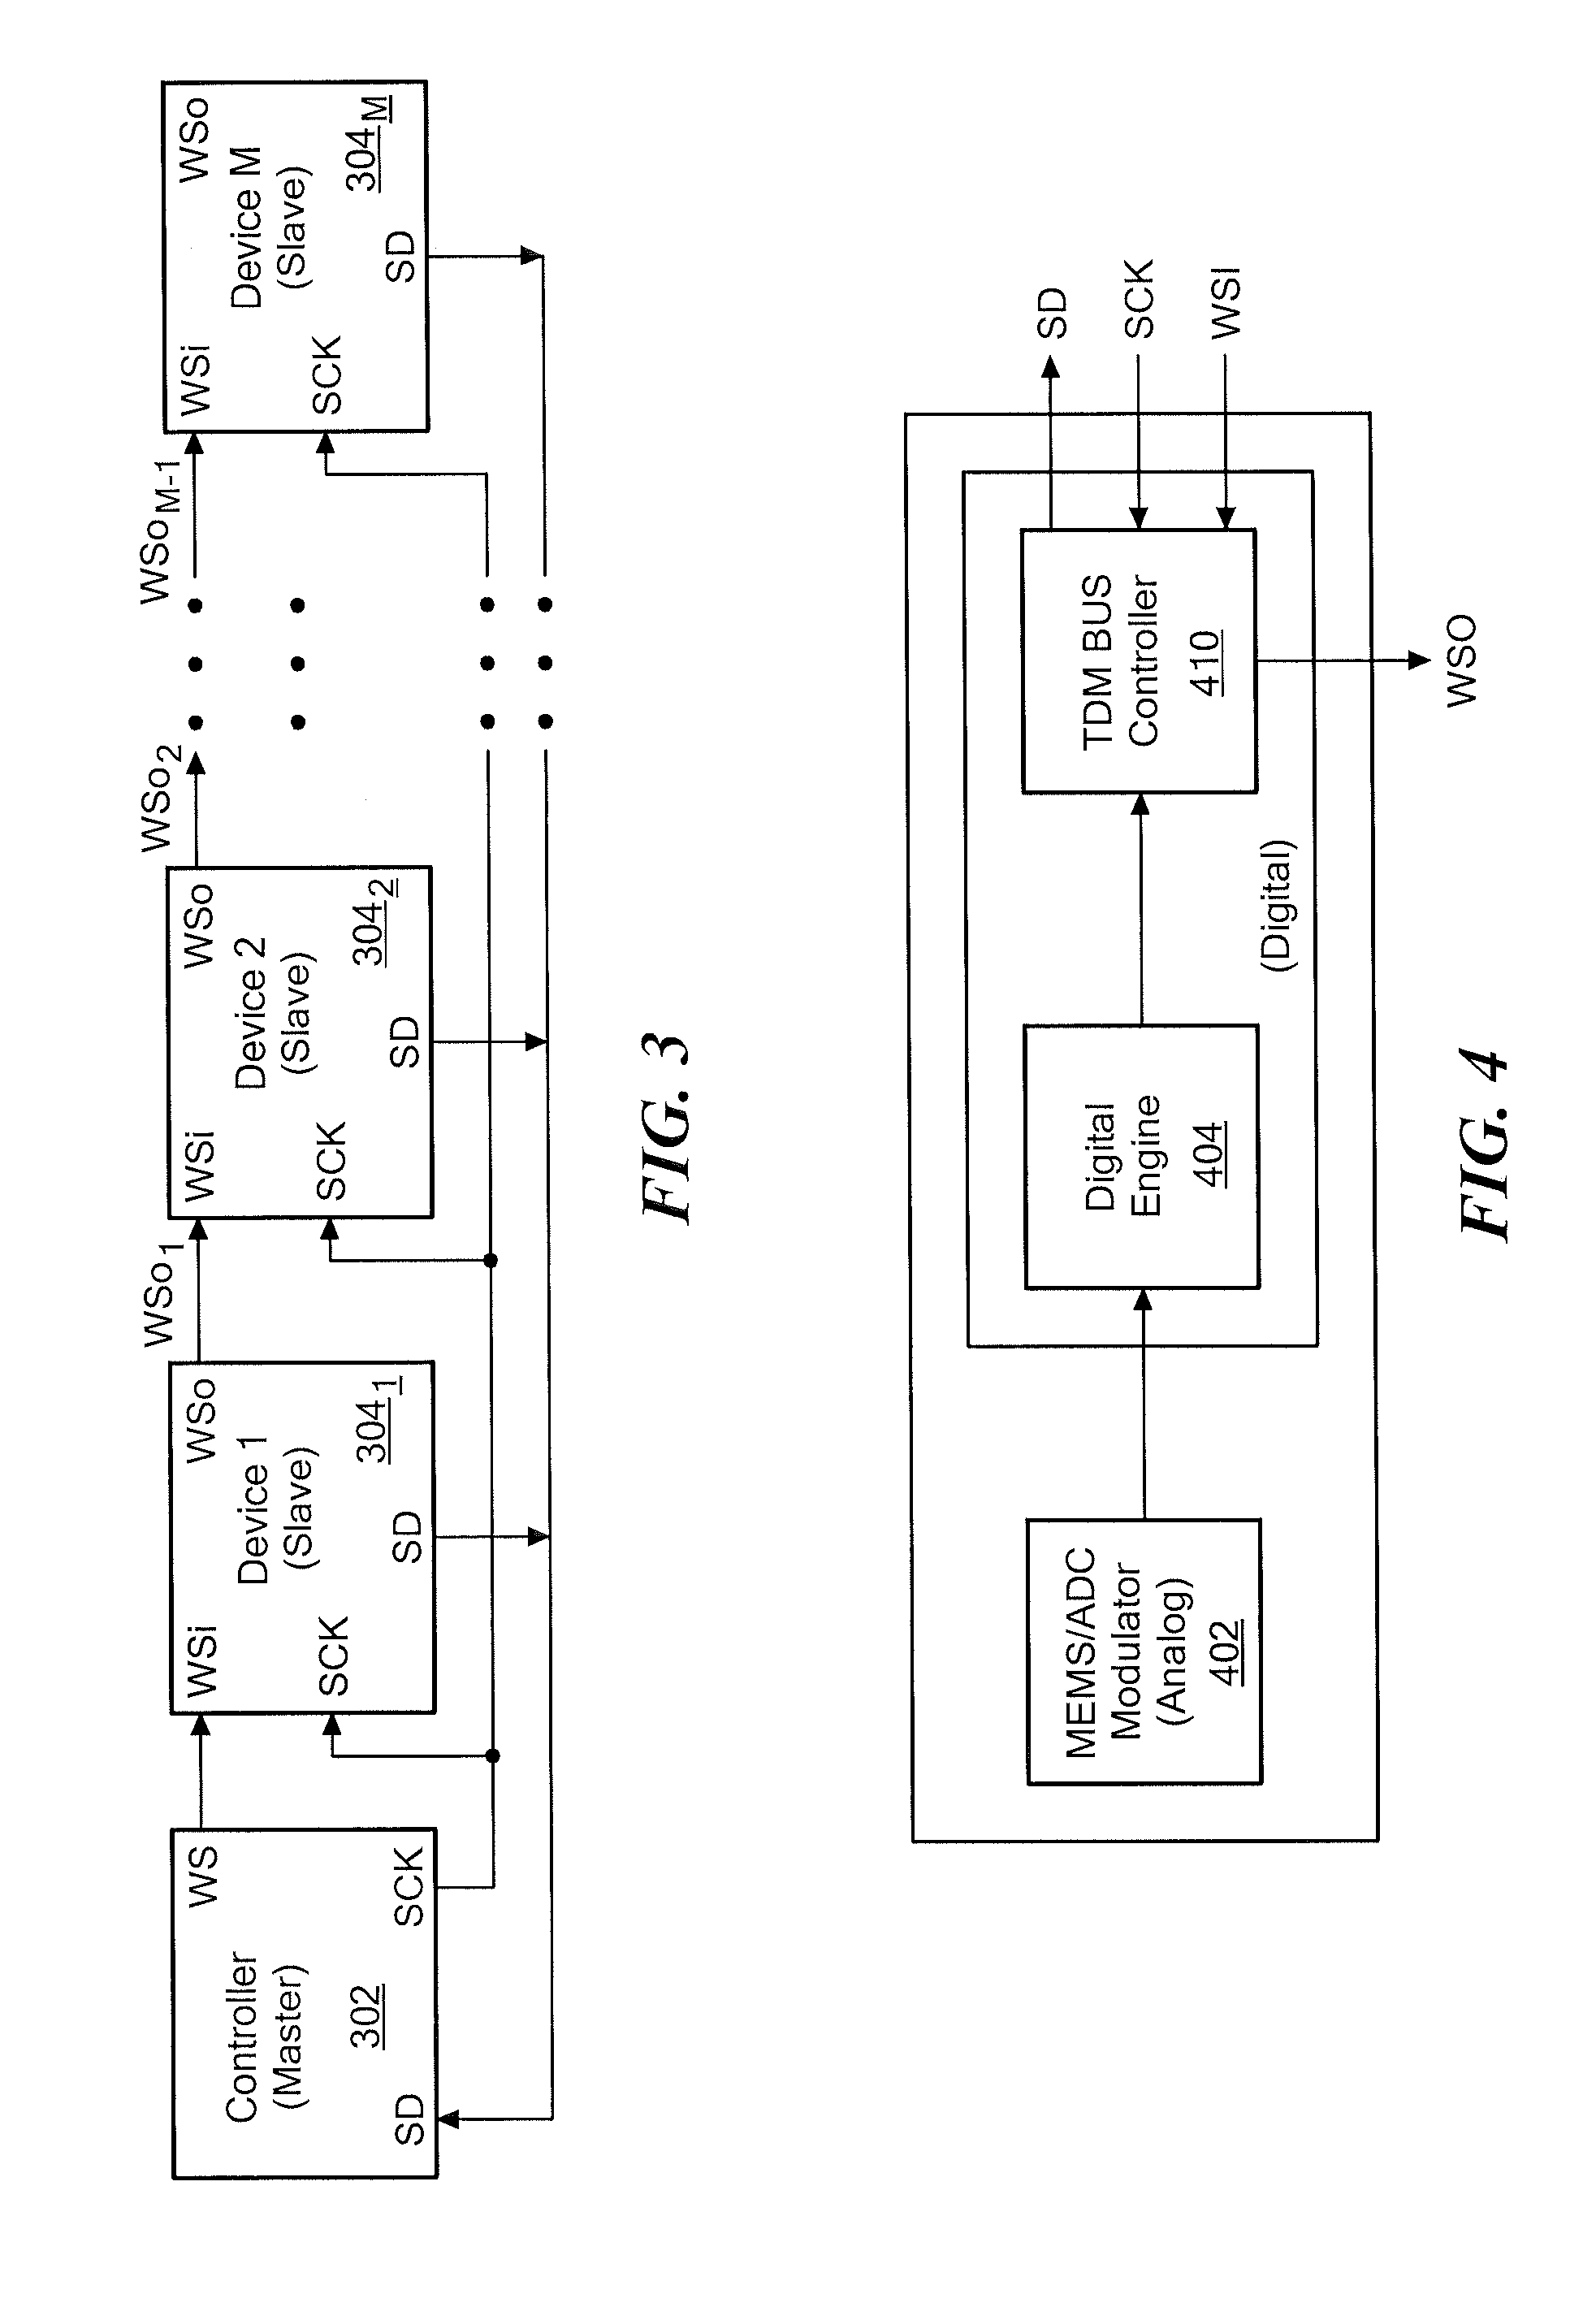 Synchronization, Re-Synchronization, Addressing, and Serialized Signal Processing for Daisy-Chained Communication Devices